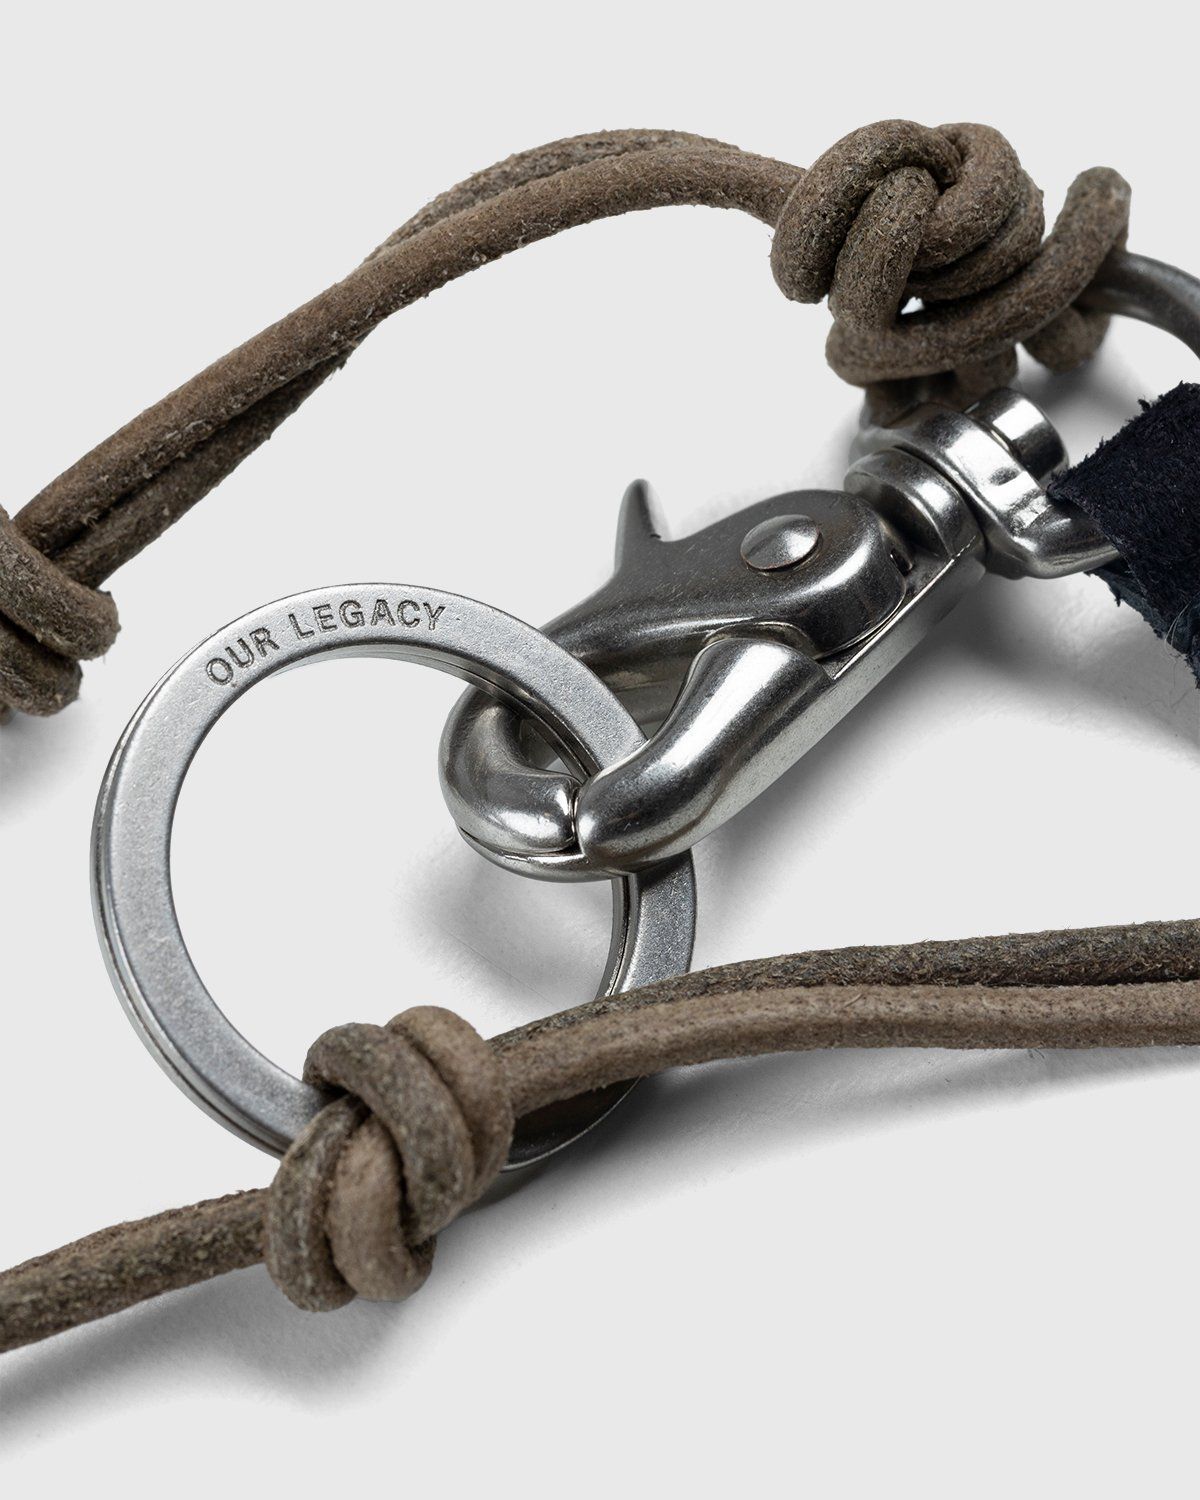 Our Legacy – Key Chain Ladon Olive Leather - Image 3